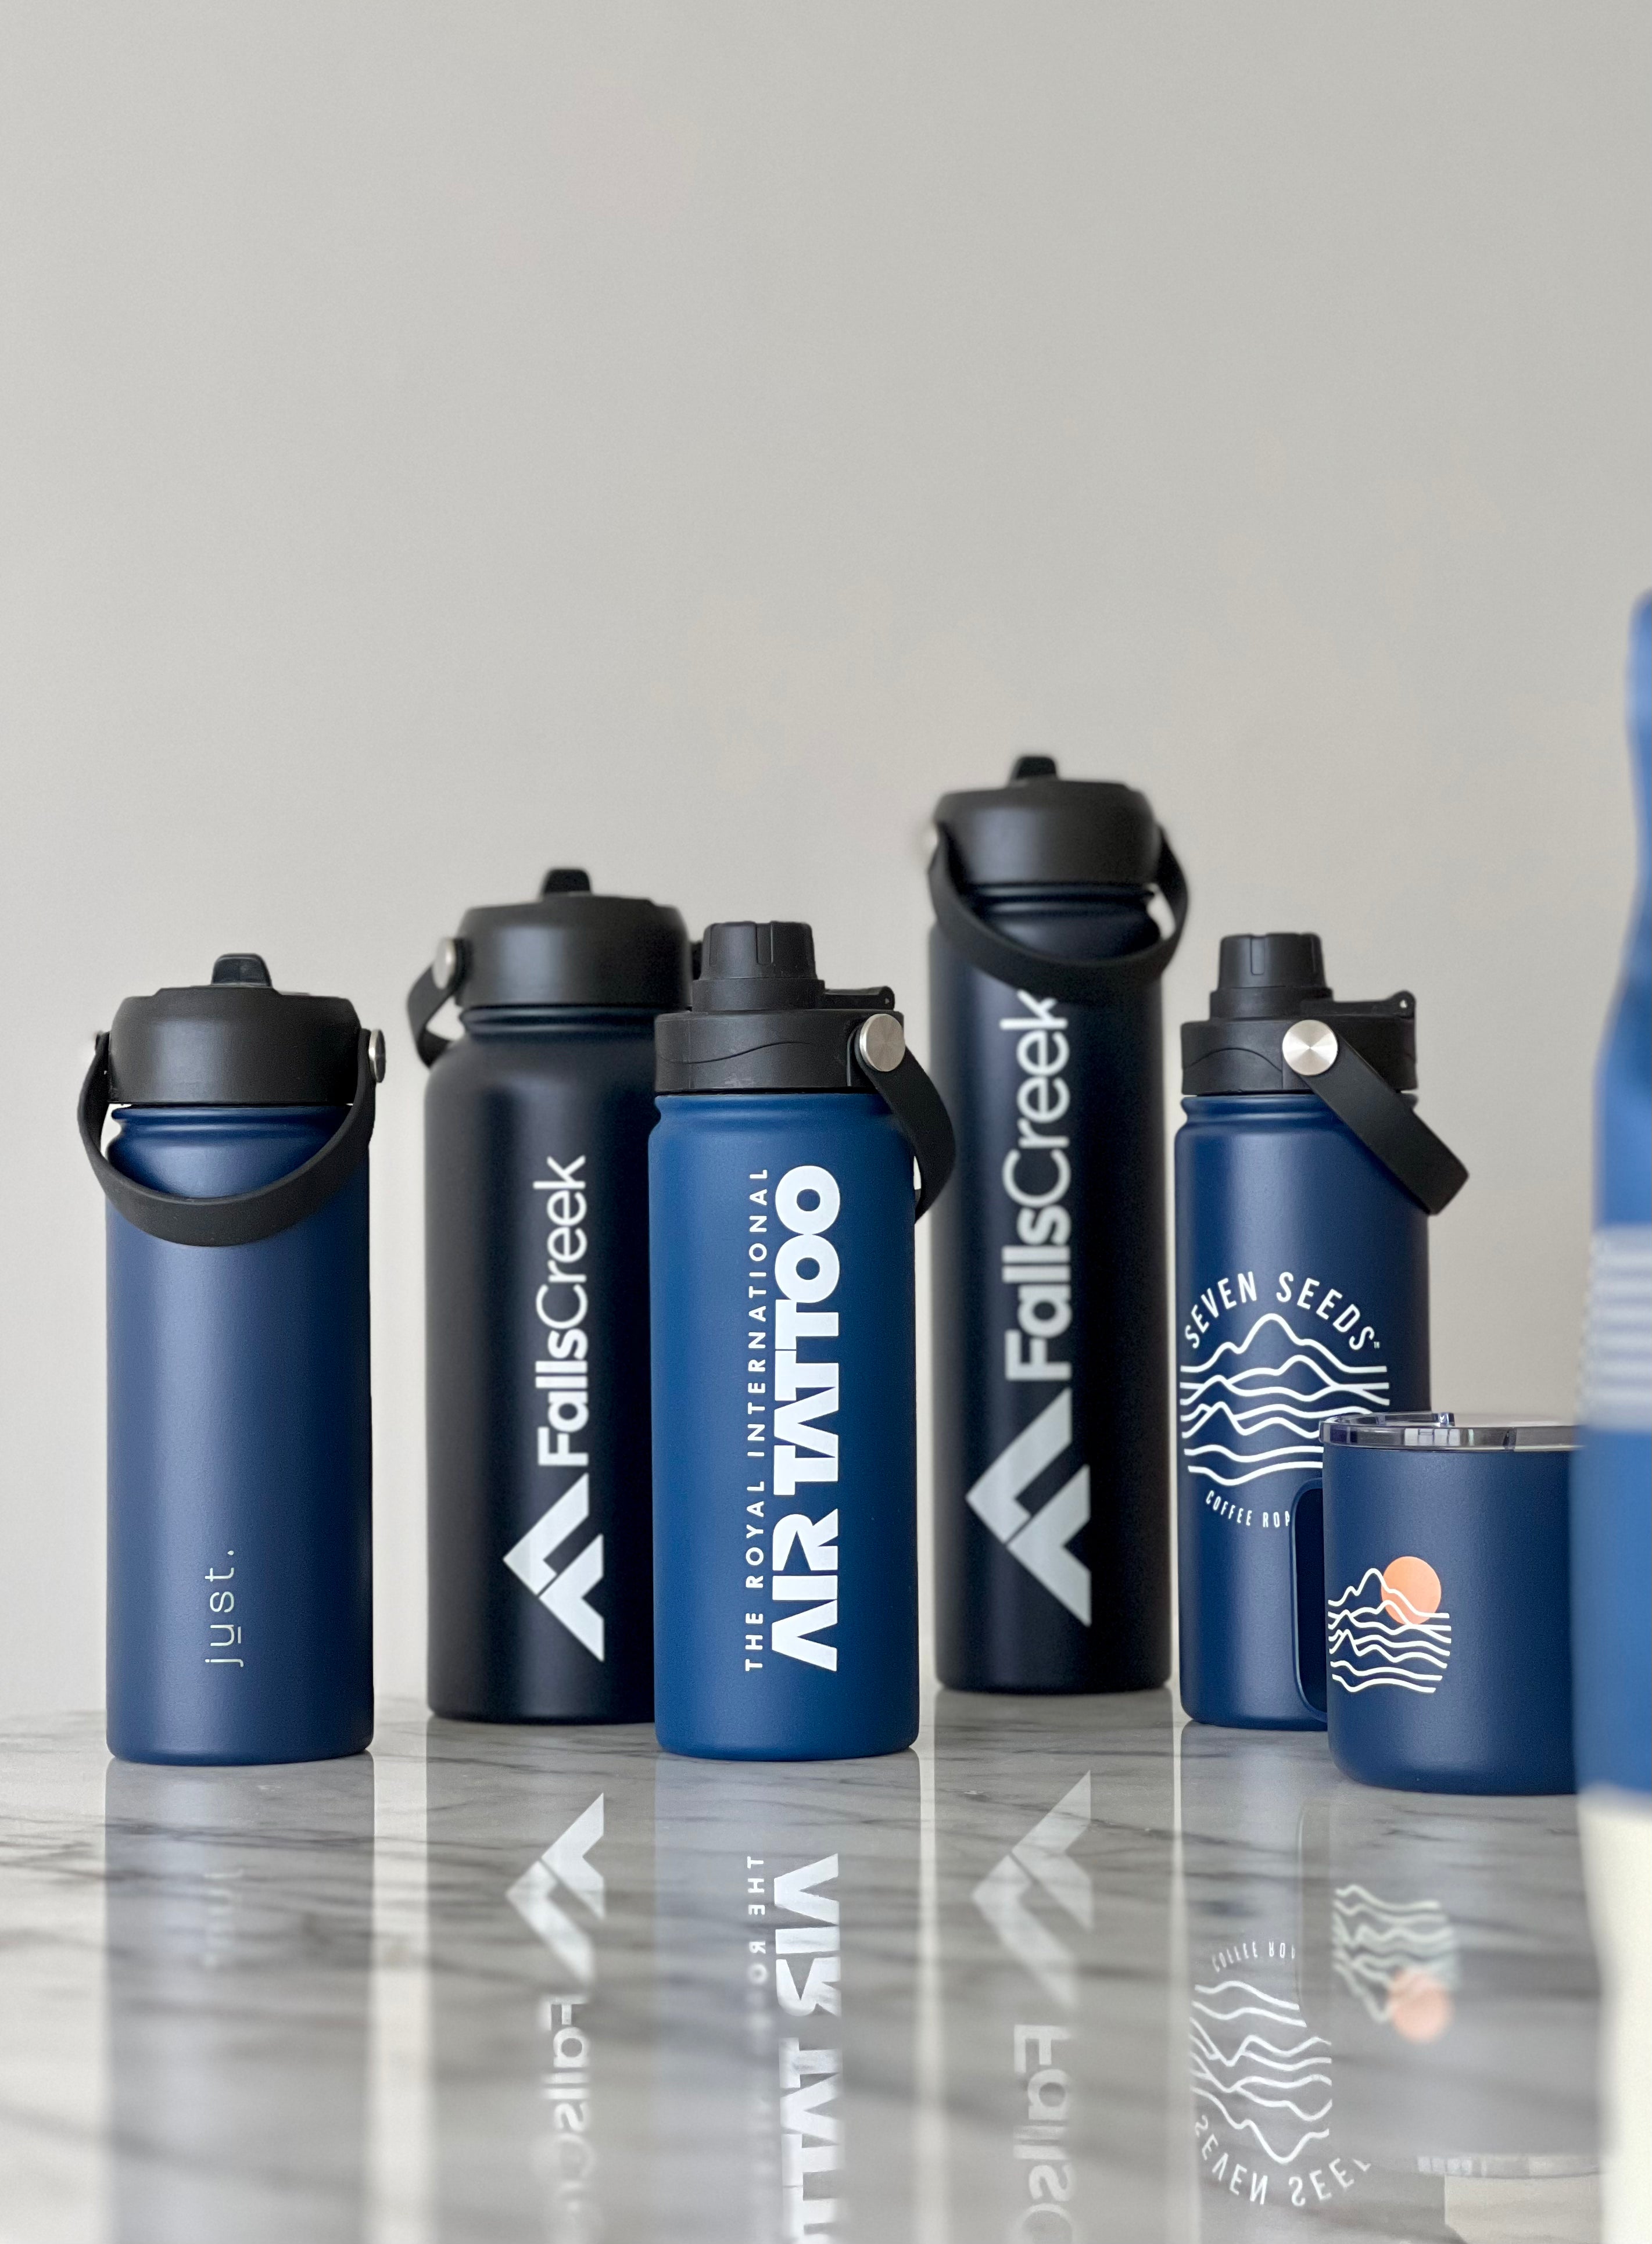 five blue custom branded stainless steel water bottles next to a custom branded mug with customised logos printed on the co brand products